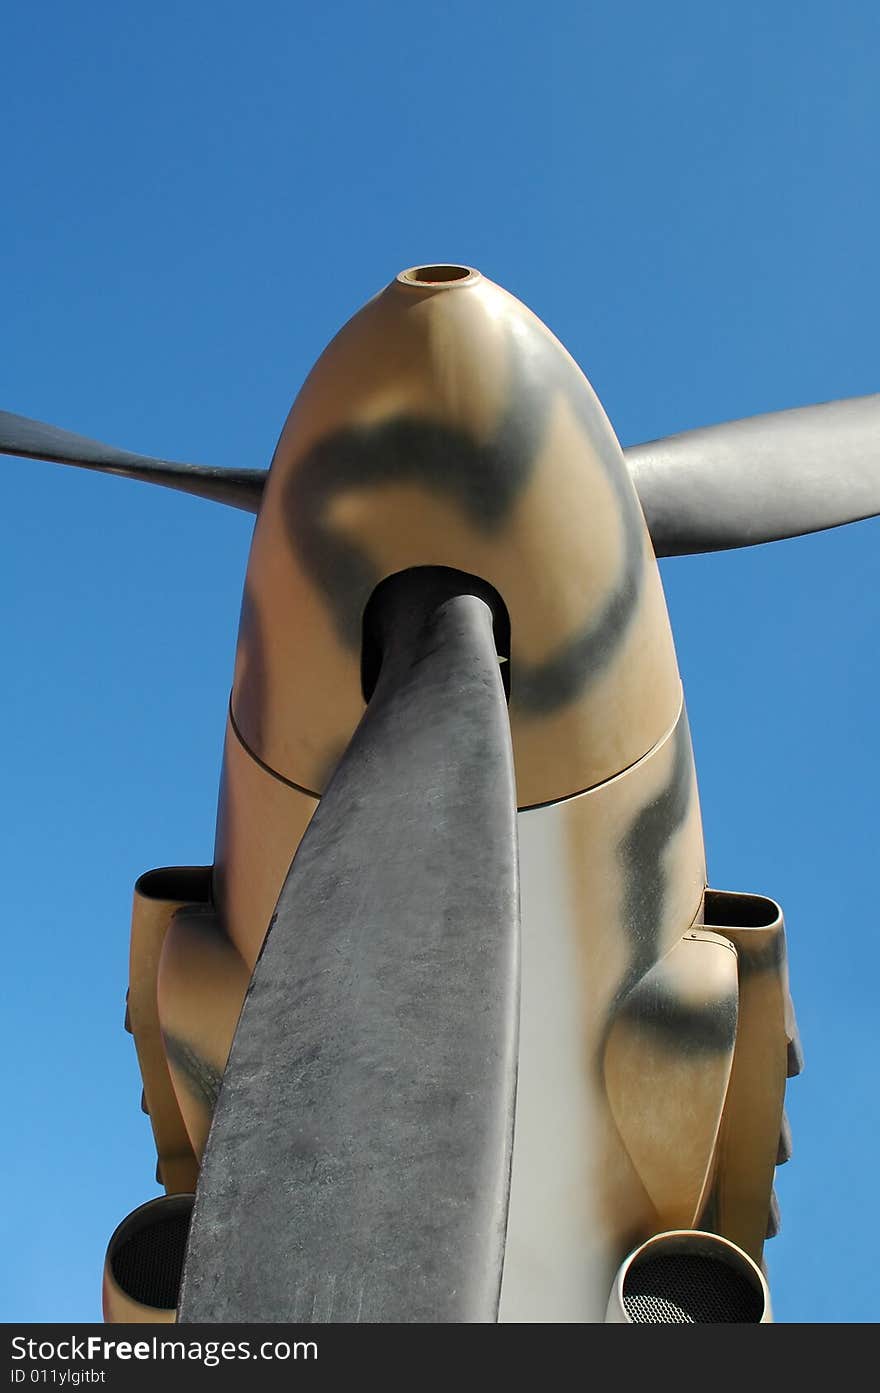 Close-up of the propeller of a WWII military fighter aircraft. Close-up of the propeller of a WWII military fighter aircraft